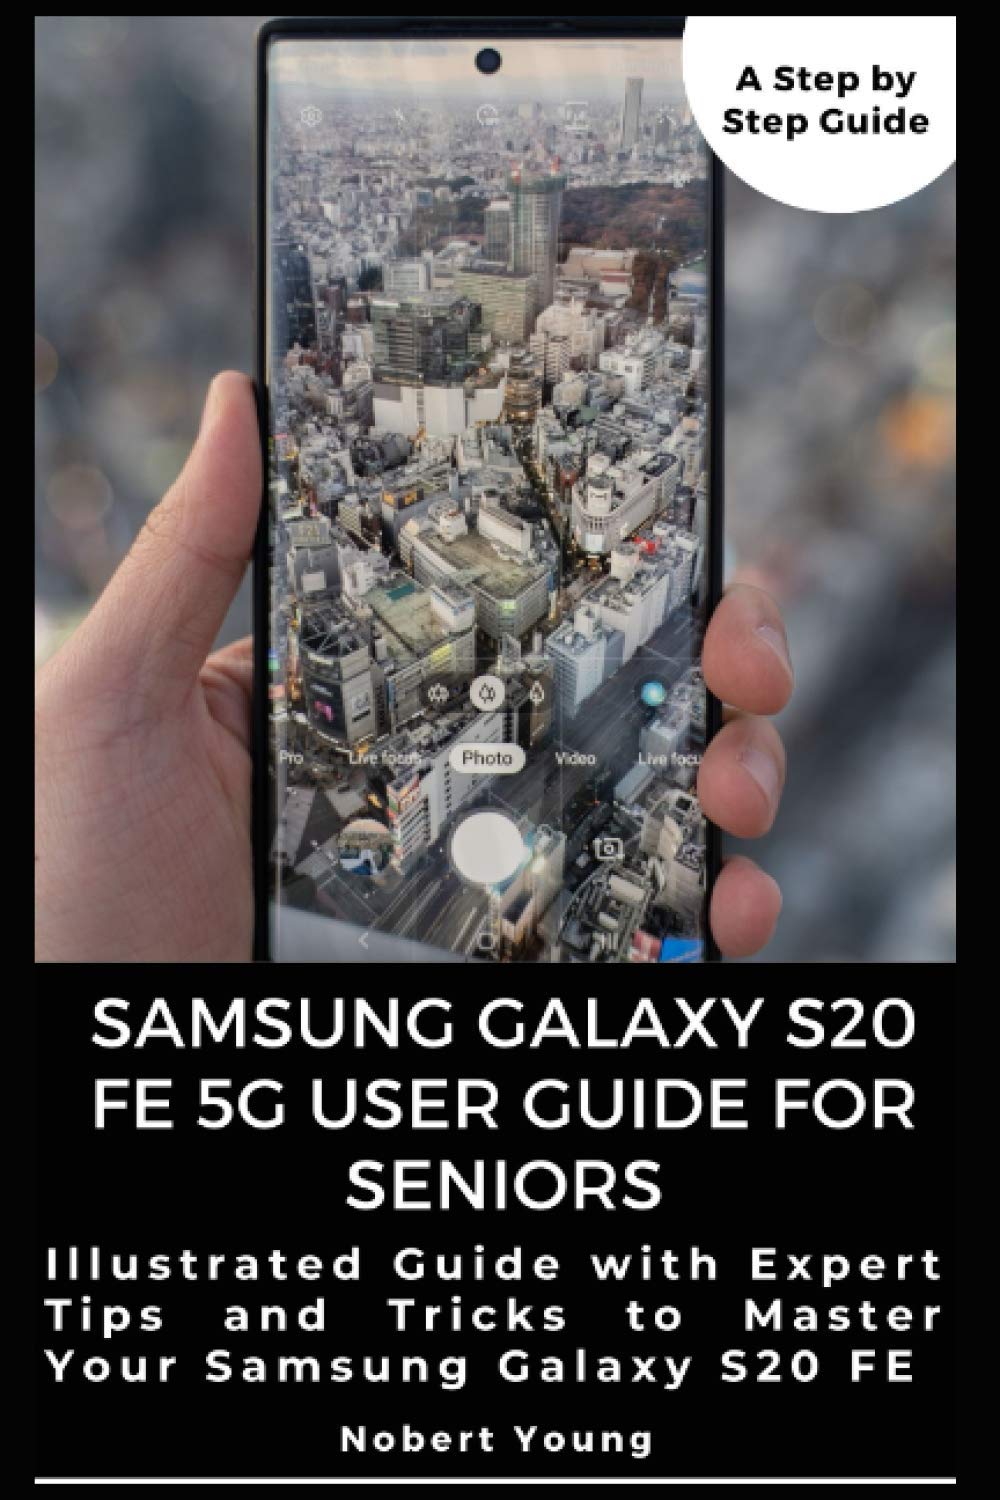 Samsung Galaxy S20 FE 5G User Guide for Seniors: Illustrated Guide with Expert Tips and Tricks to Master Your Samsung Galaxy S20 FE